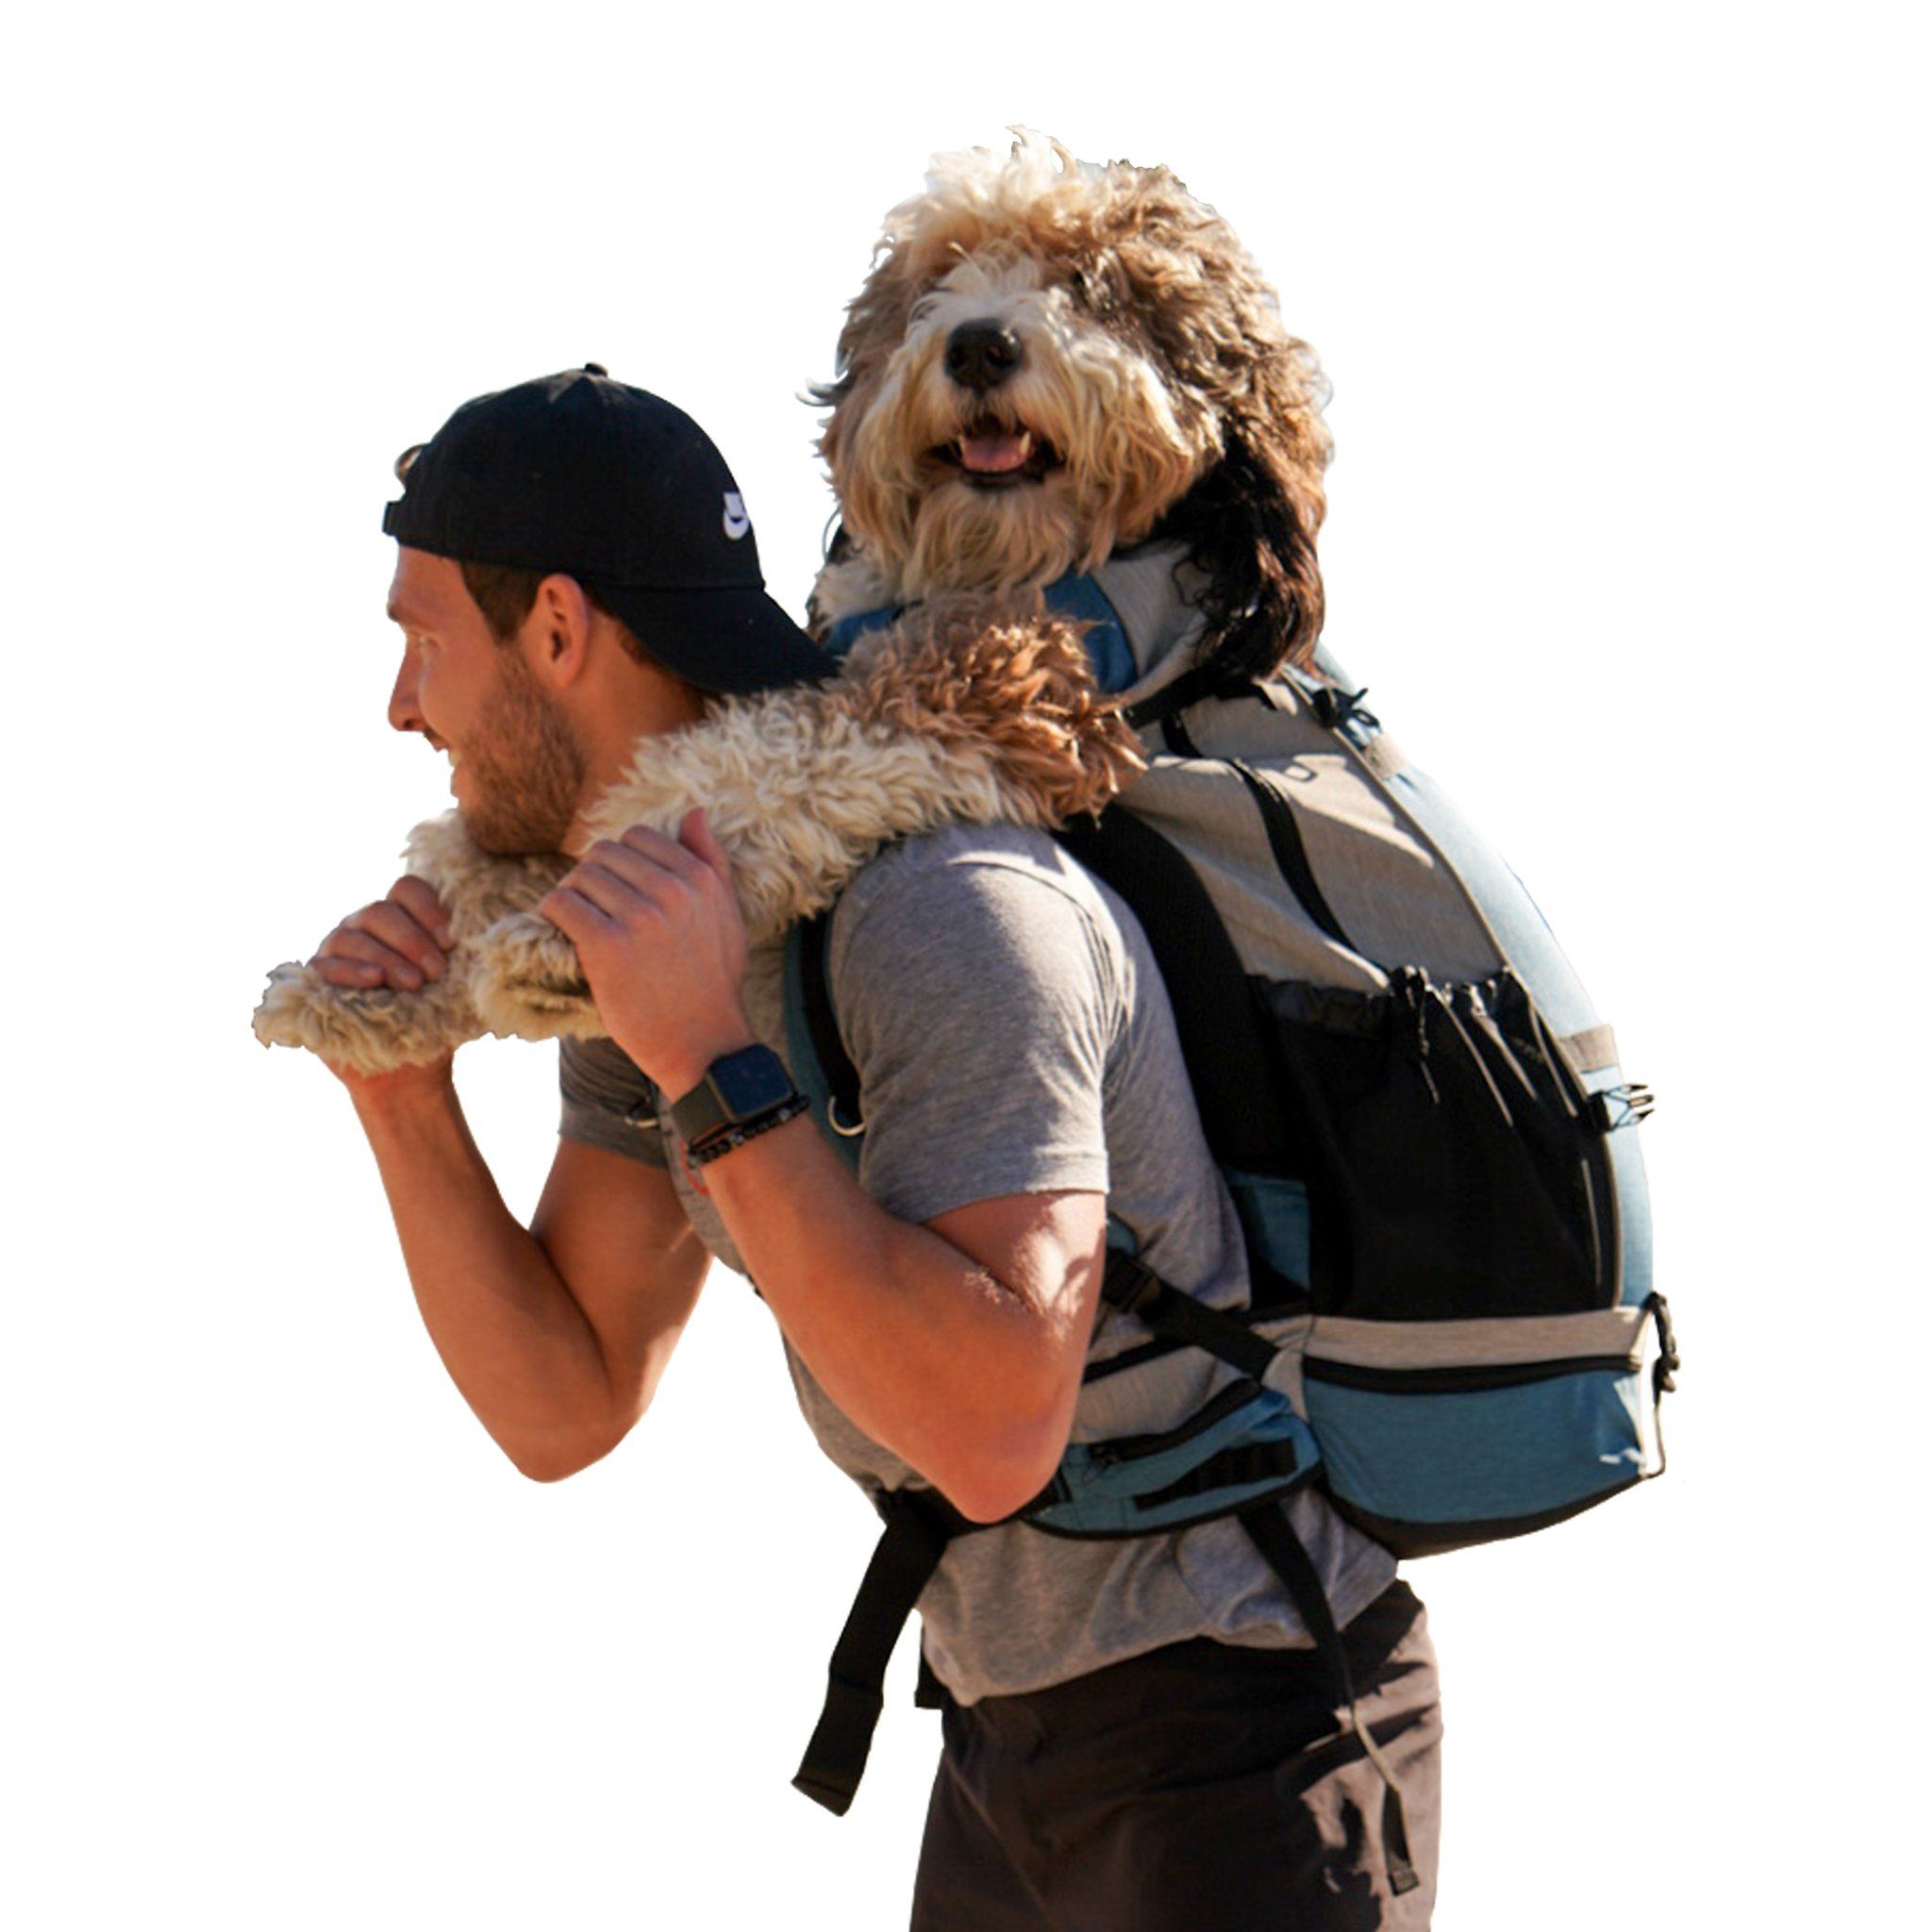 backpack dog carrier 20 lbs